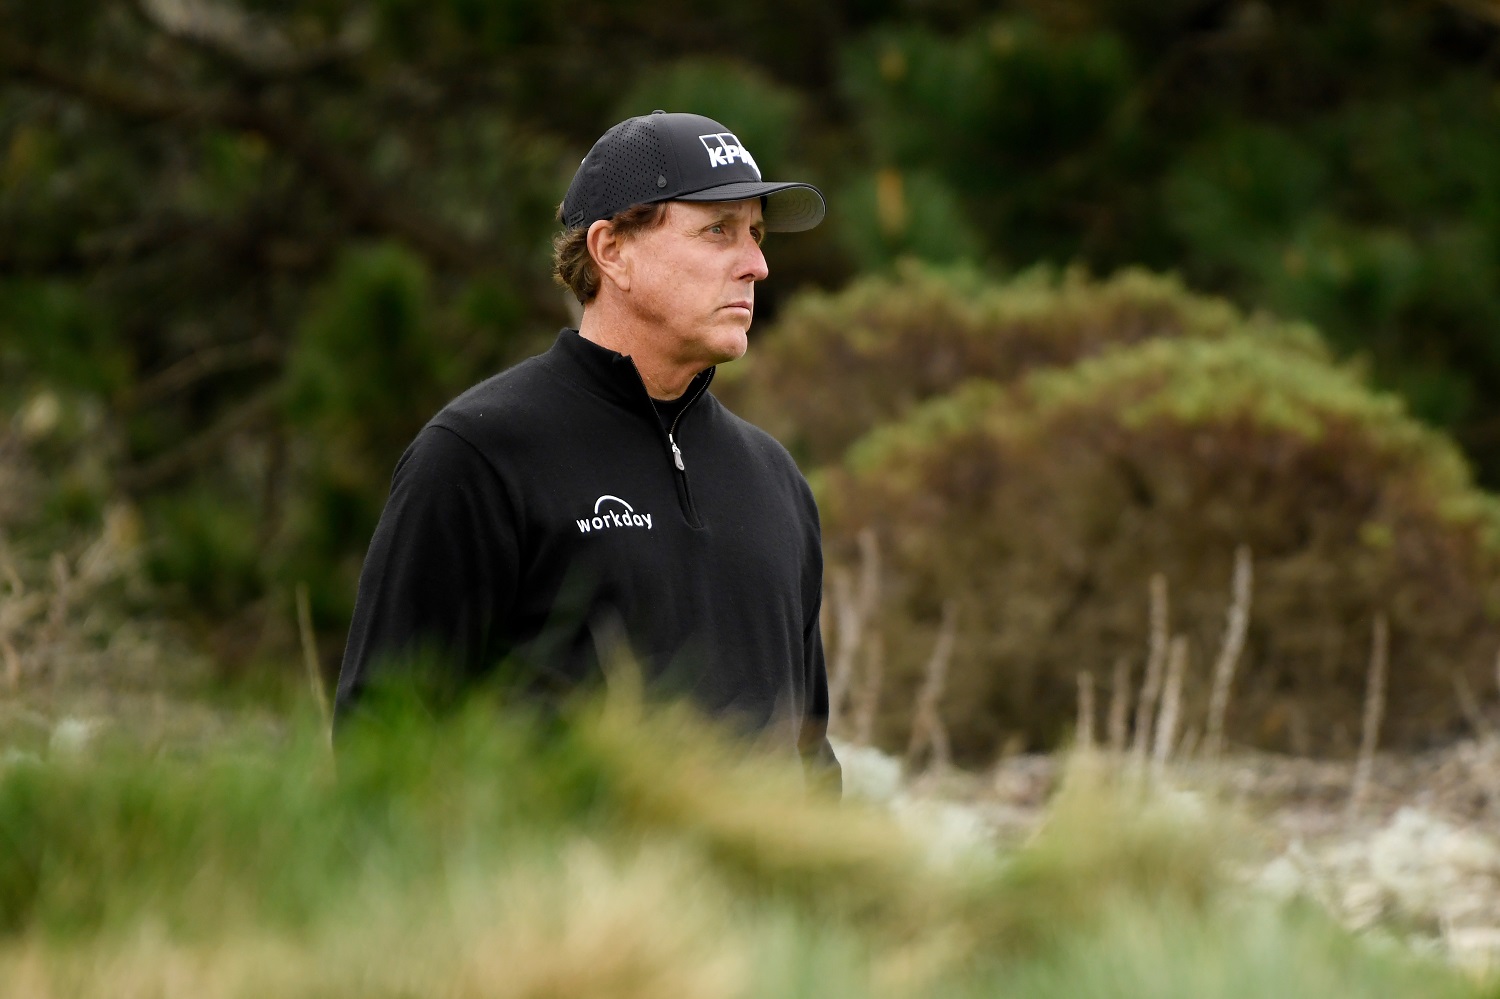 Phil Mickelson Is Signaling He’s Almost Done as a PGA Tour Regular